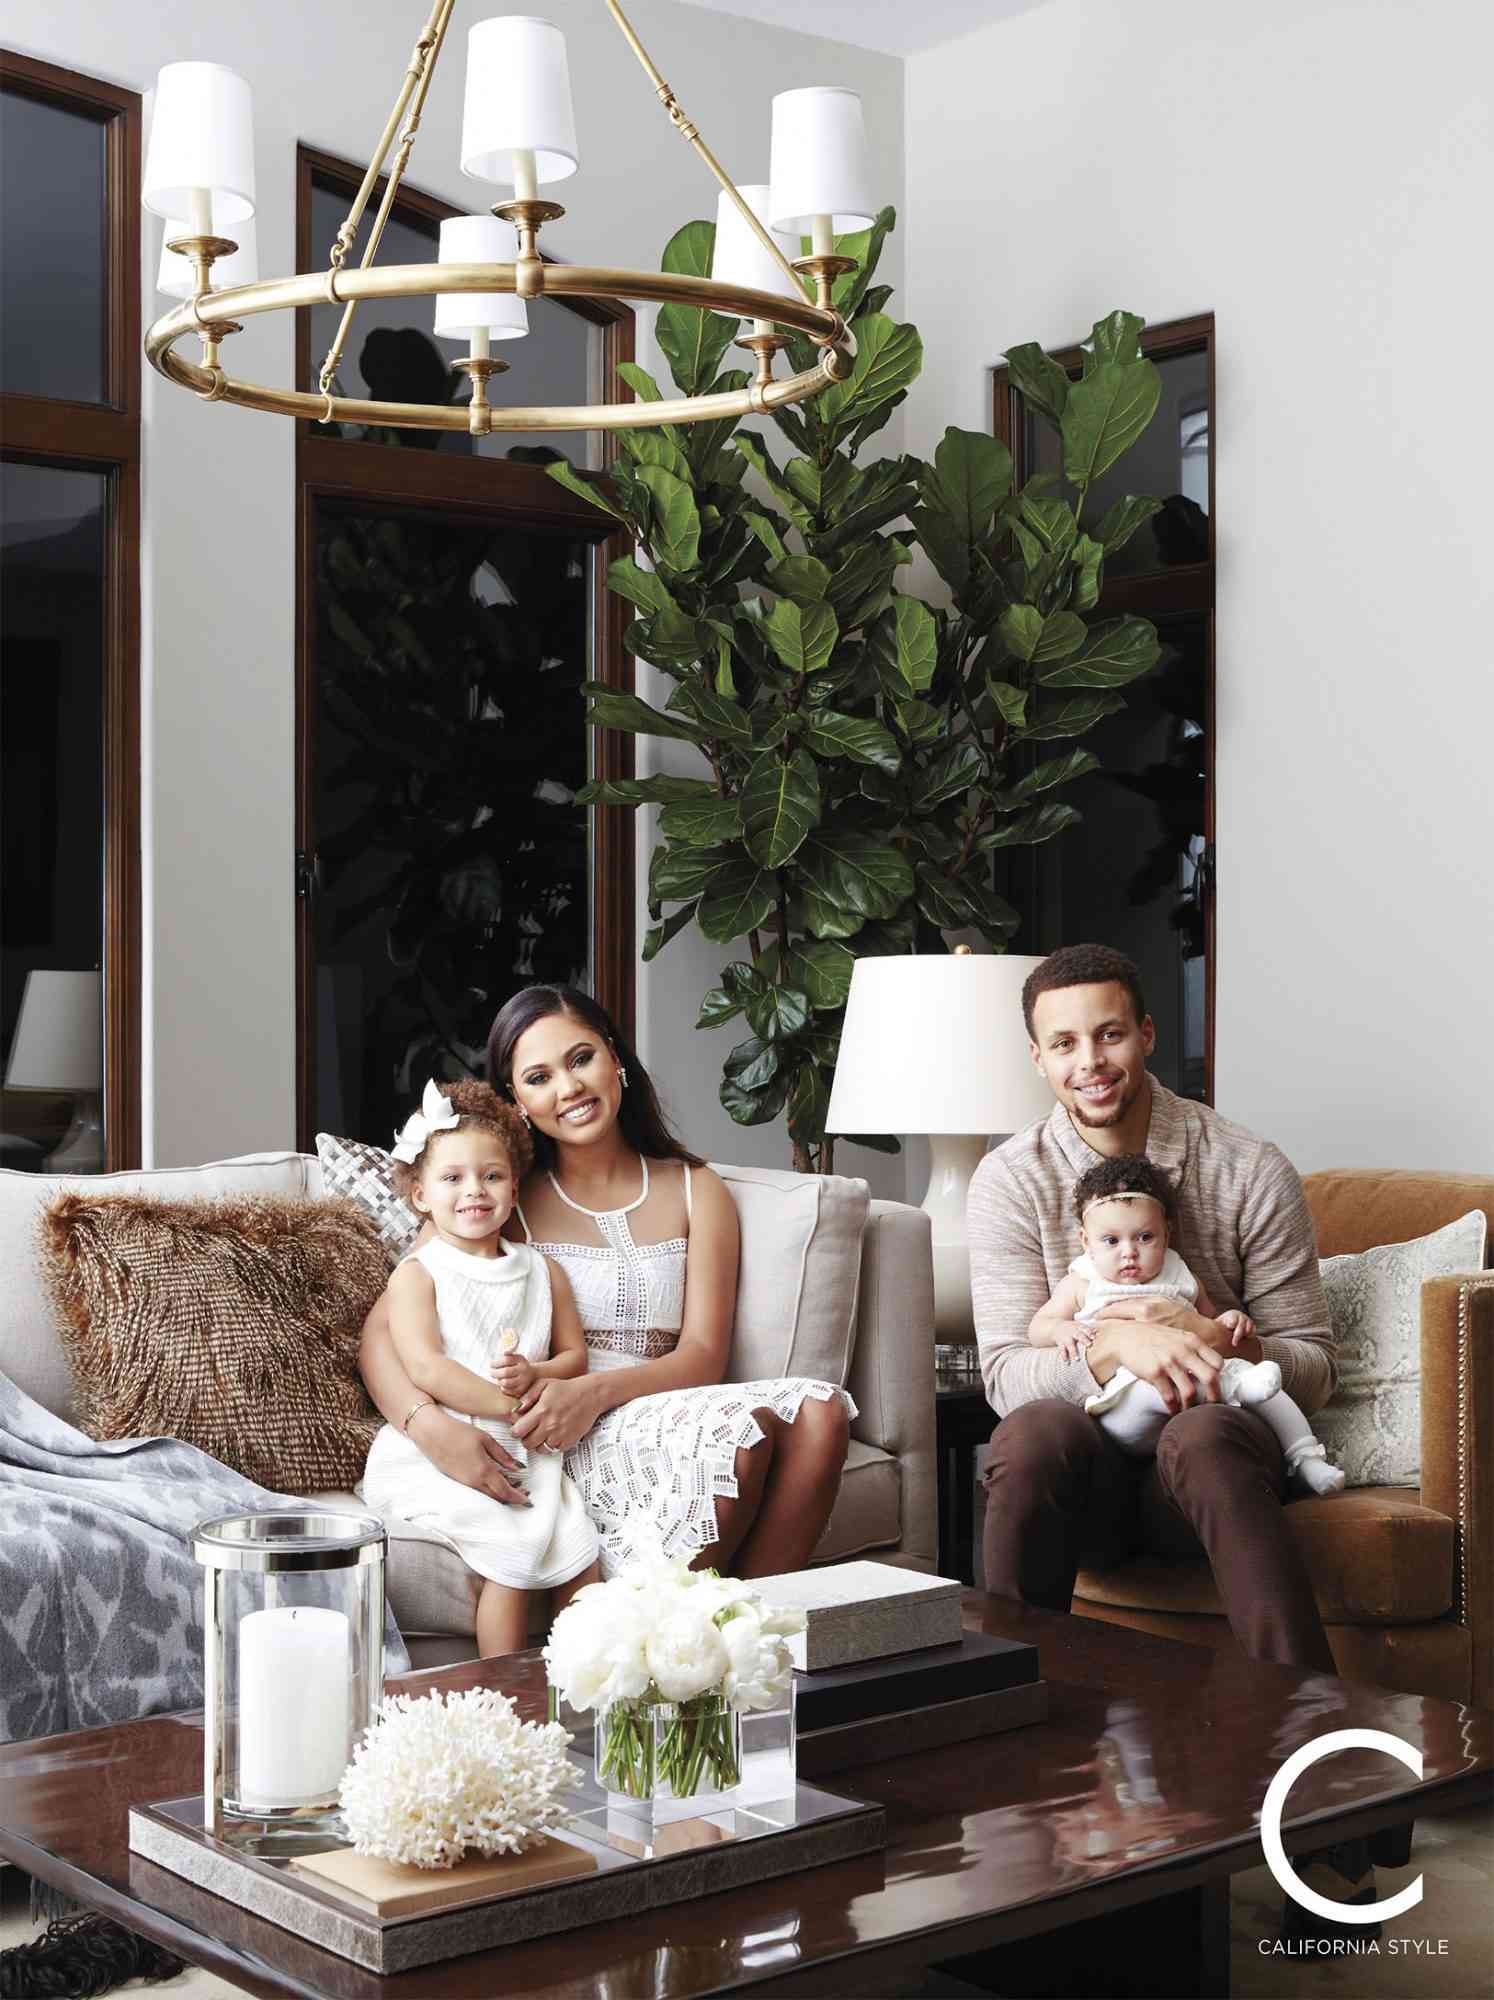 likhoa family home visit and learn about the daily life of the stephen and ayesha curry family 65210f1dda445 Family Home: Visit And Learn About The Daily Life Of The Stephen And Ayesha Curry Family